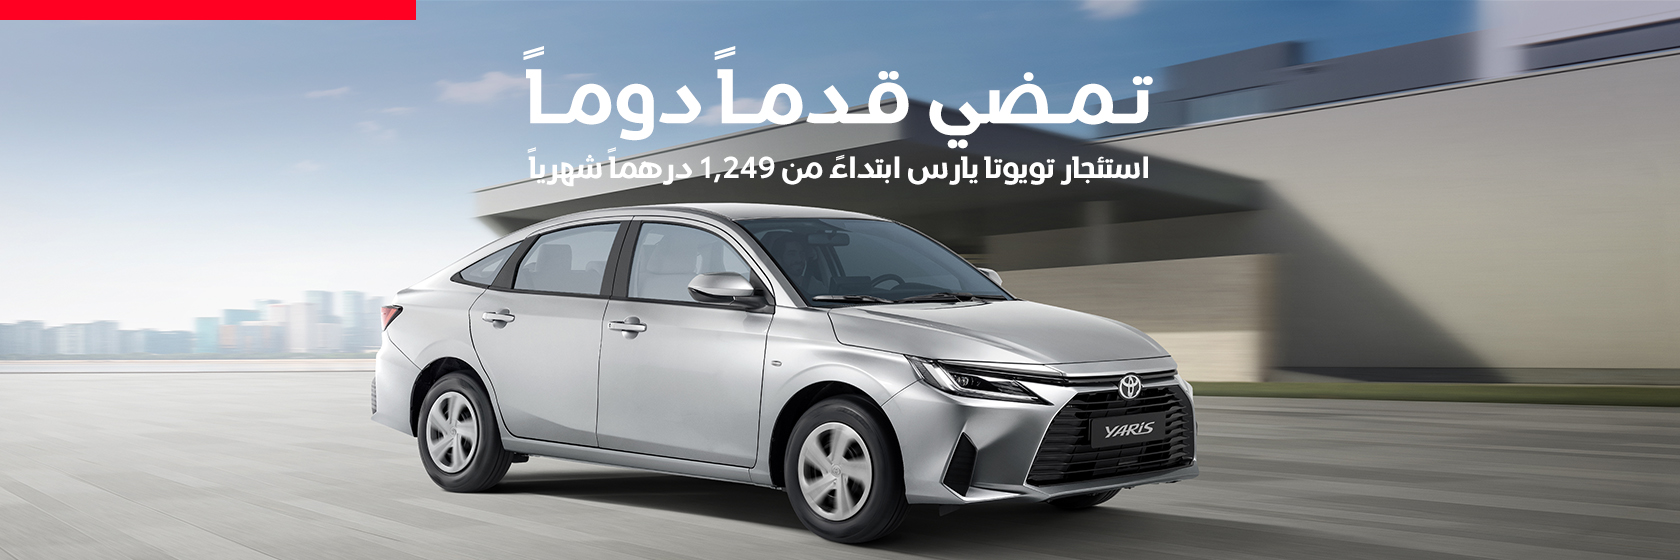 business-solutions-yaris